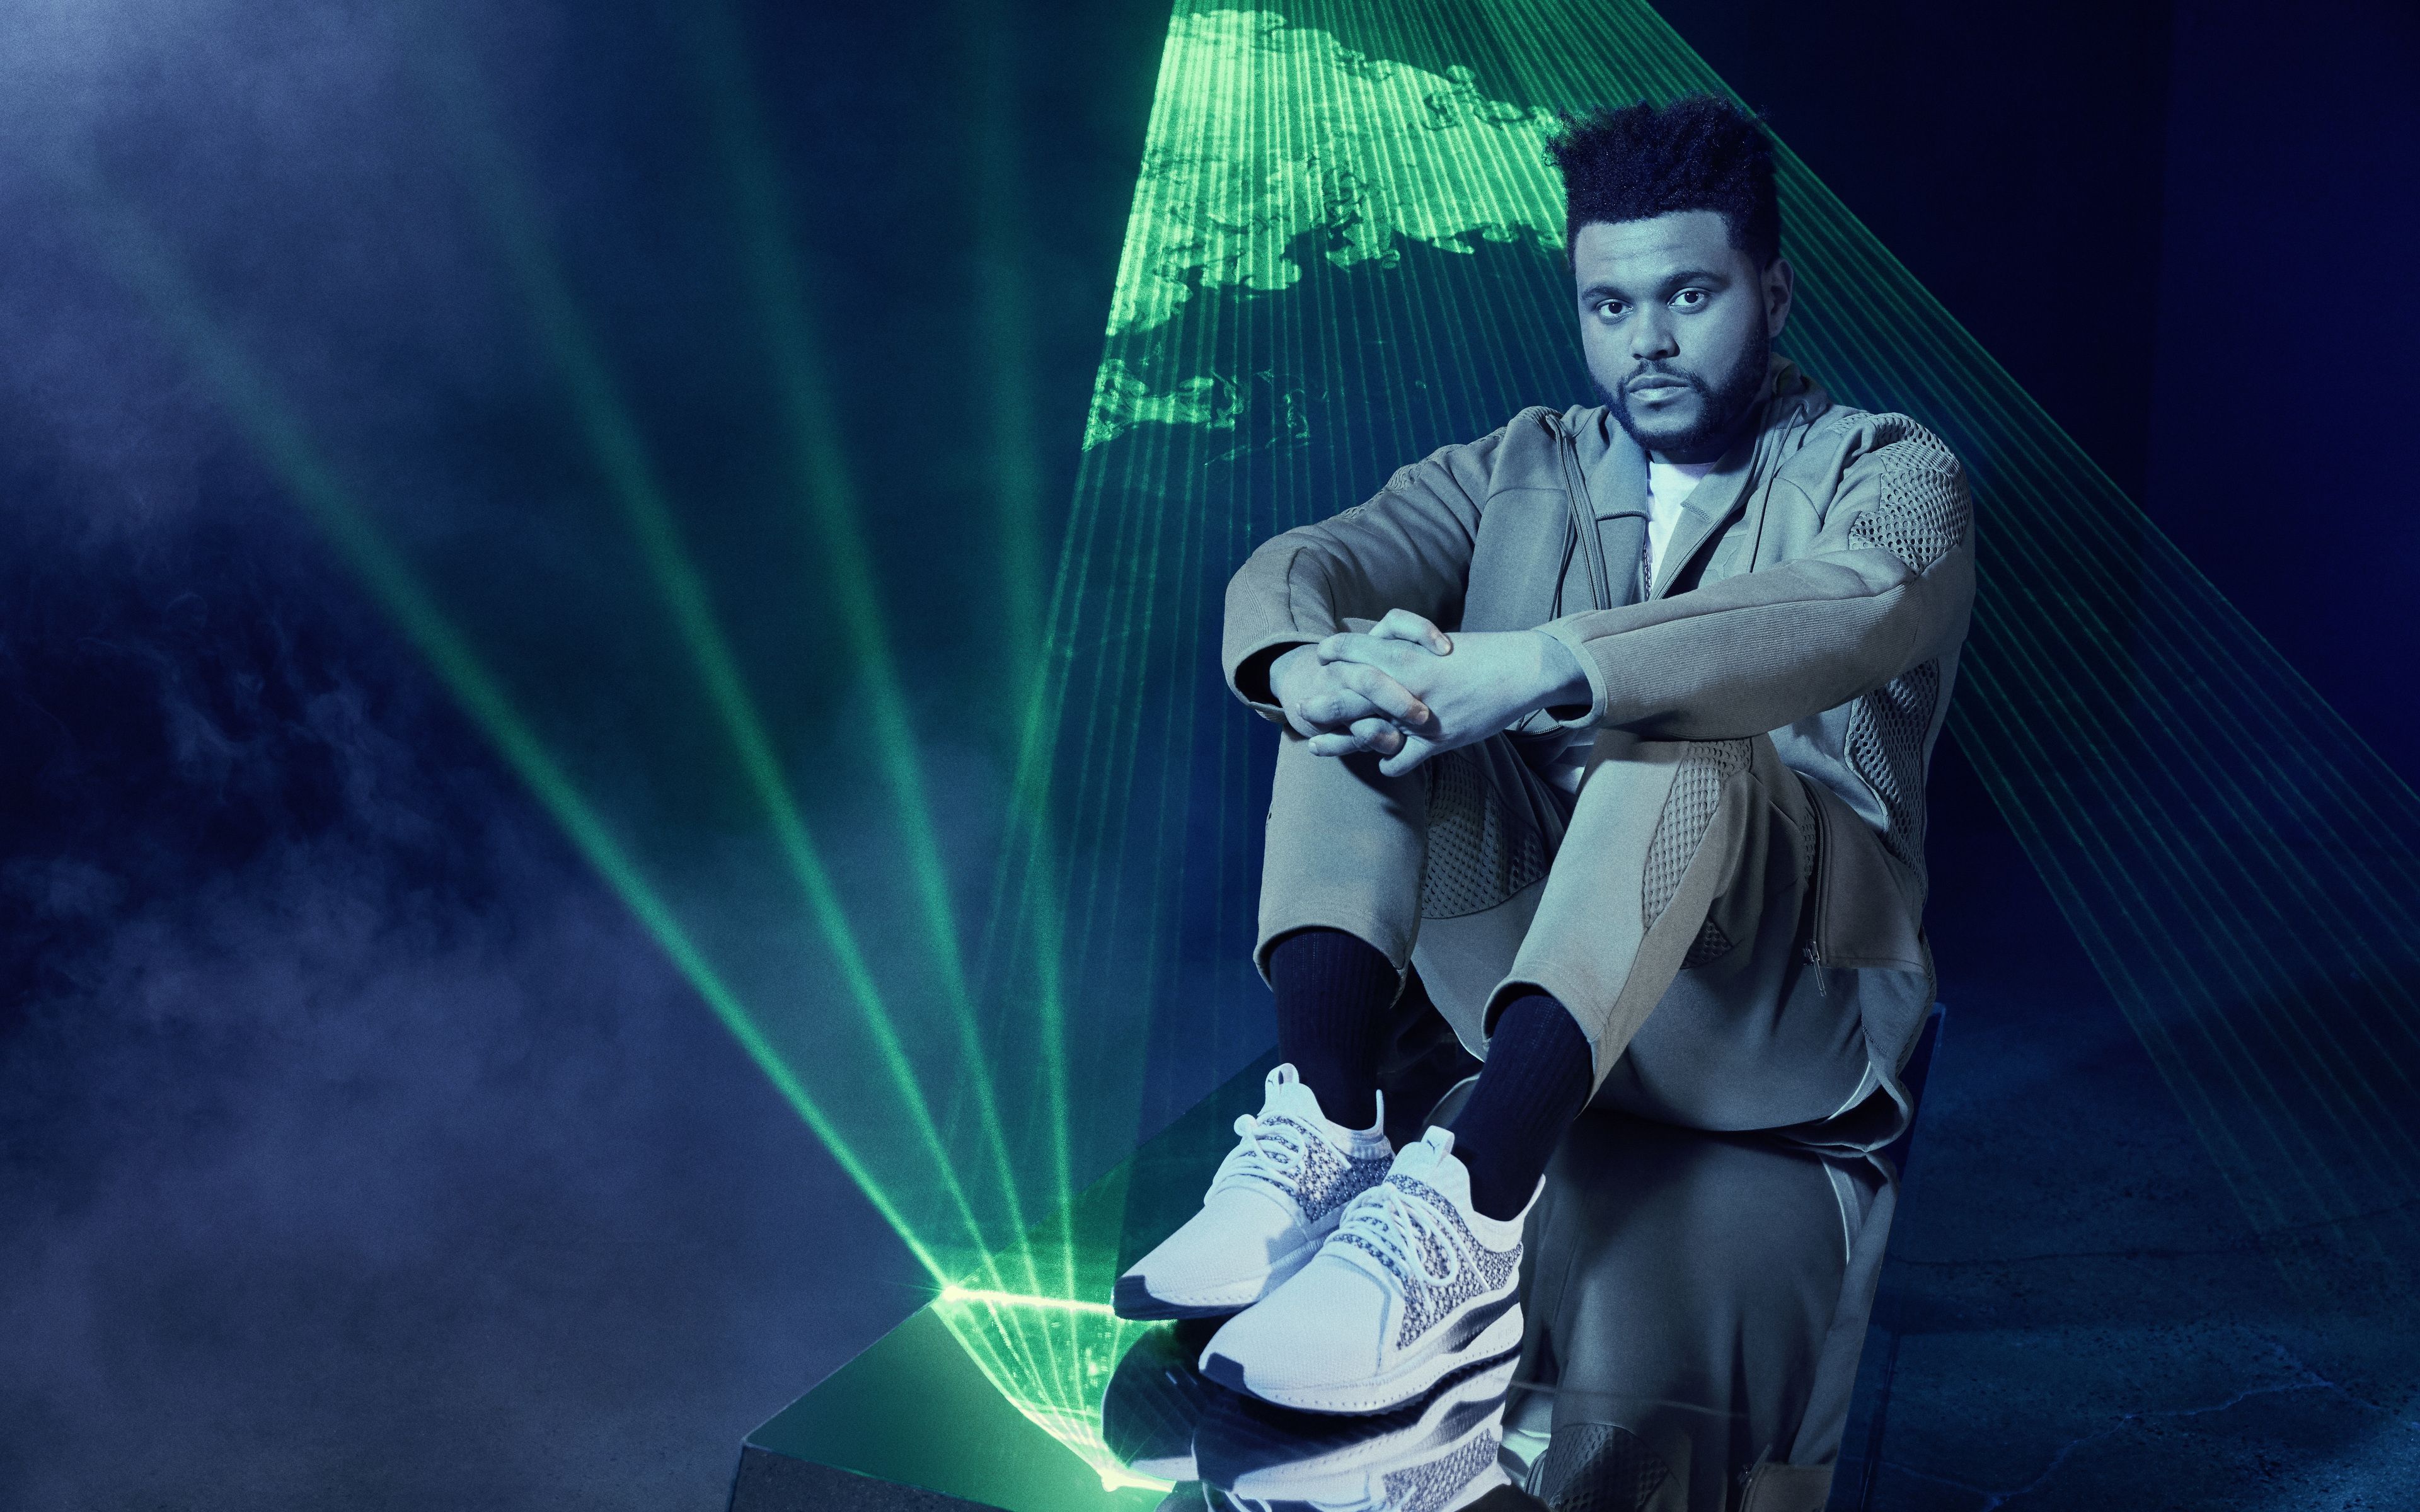 Download wallpaper The Weeknd, 4k, Puma, photohoot, Abel Tesfaye, canadian singer, superstars, guys, celebrity for desktop with resolution 3840x2400. High Quality HD picture wallpaper